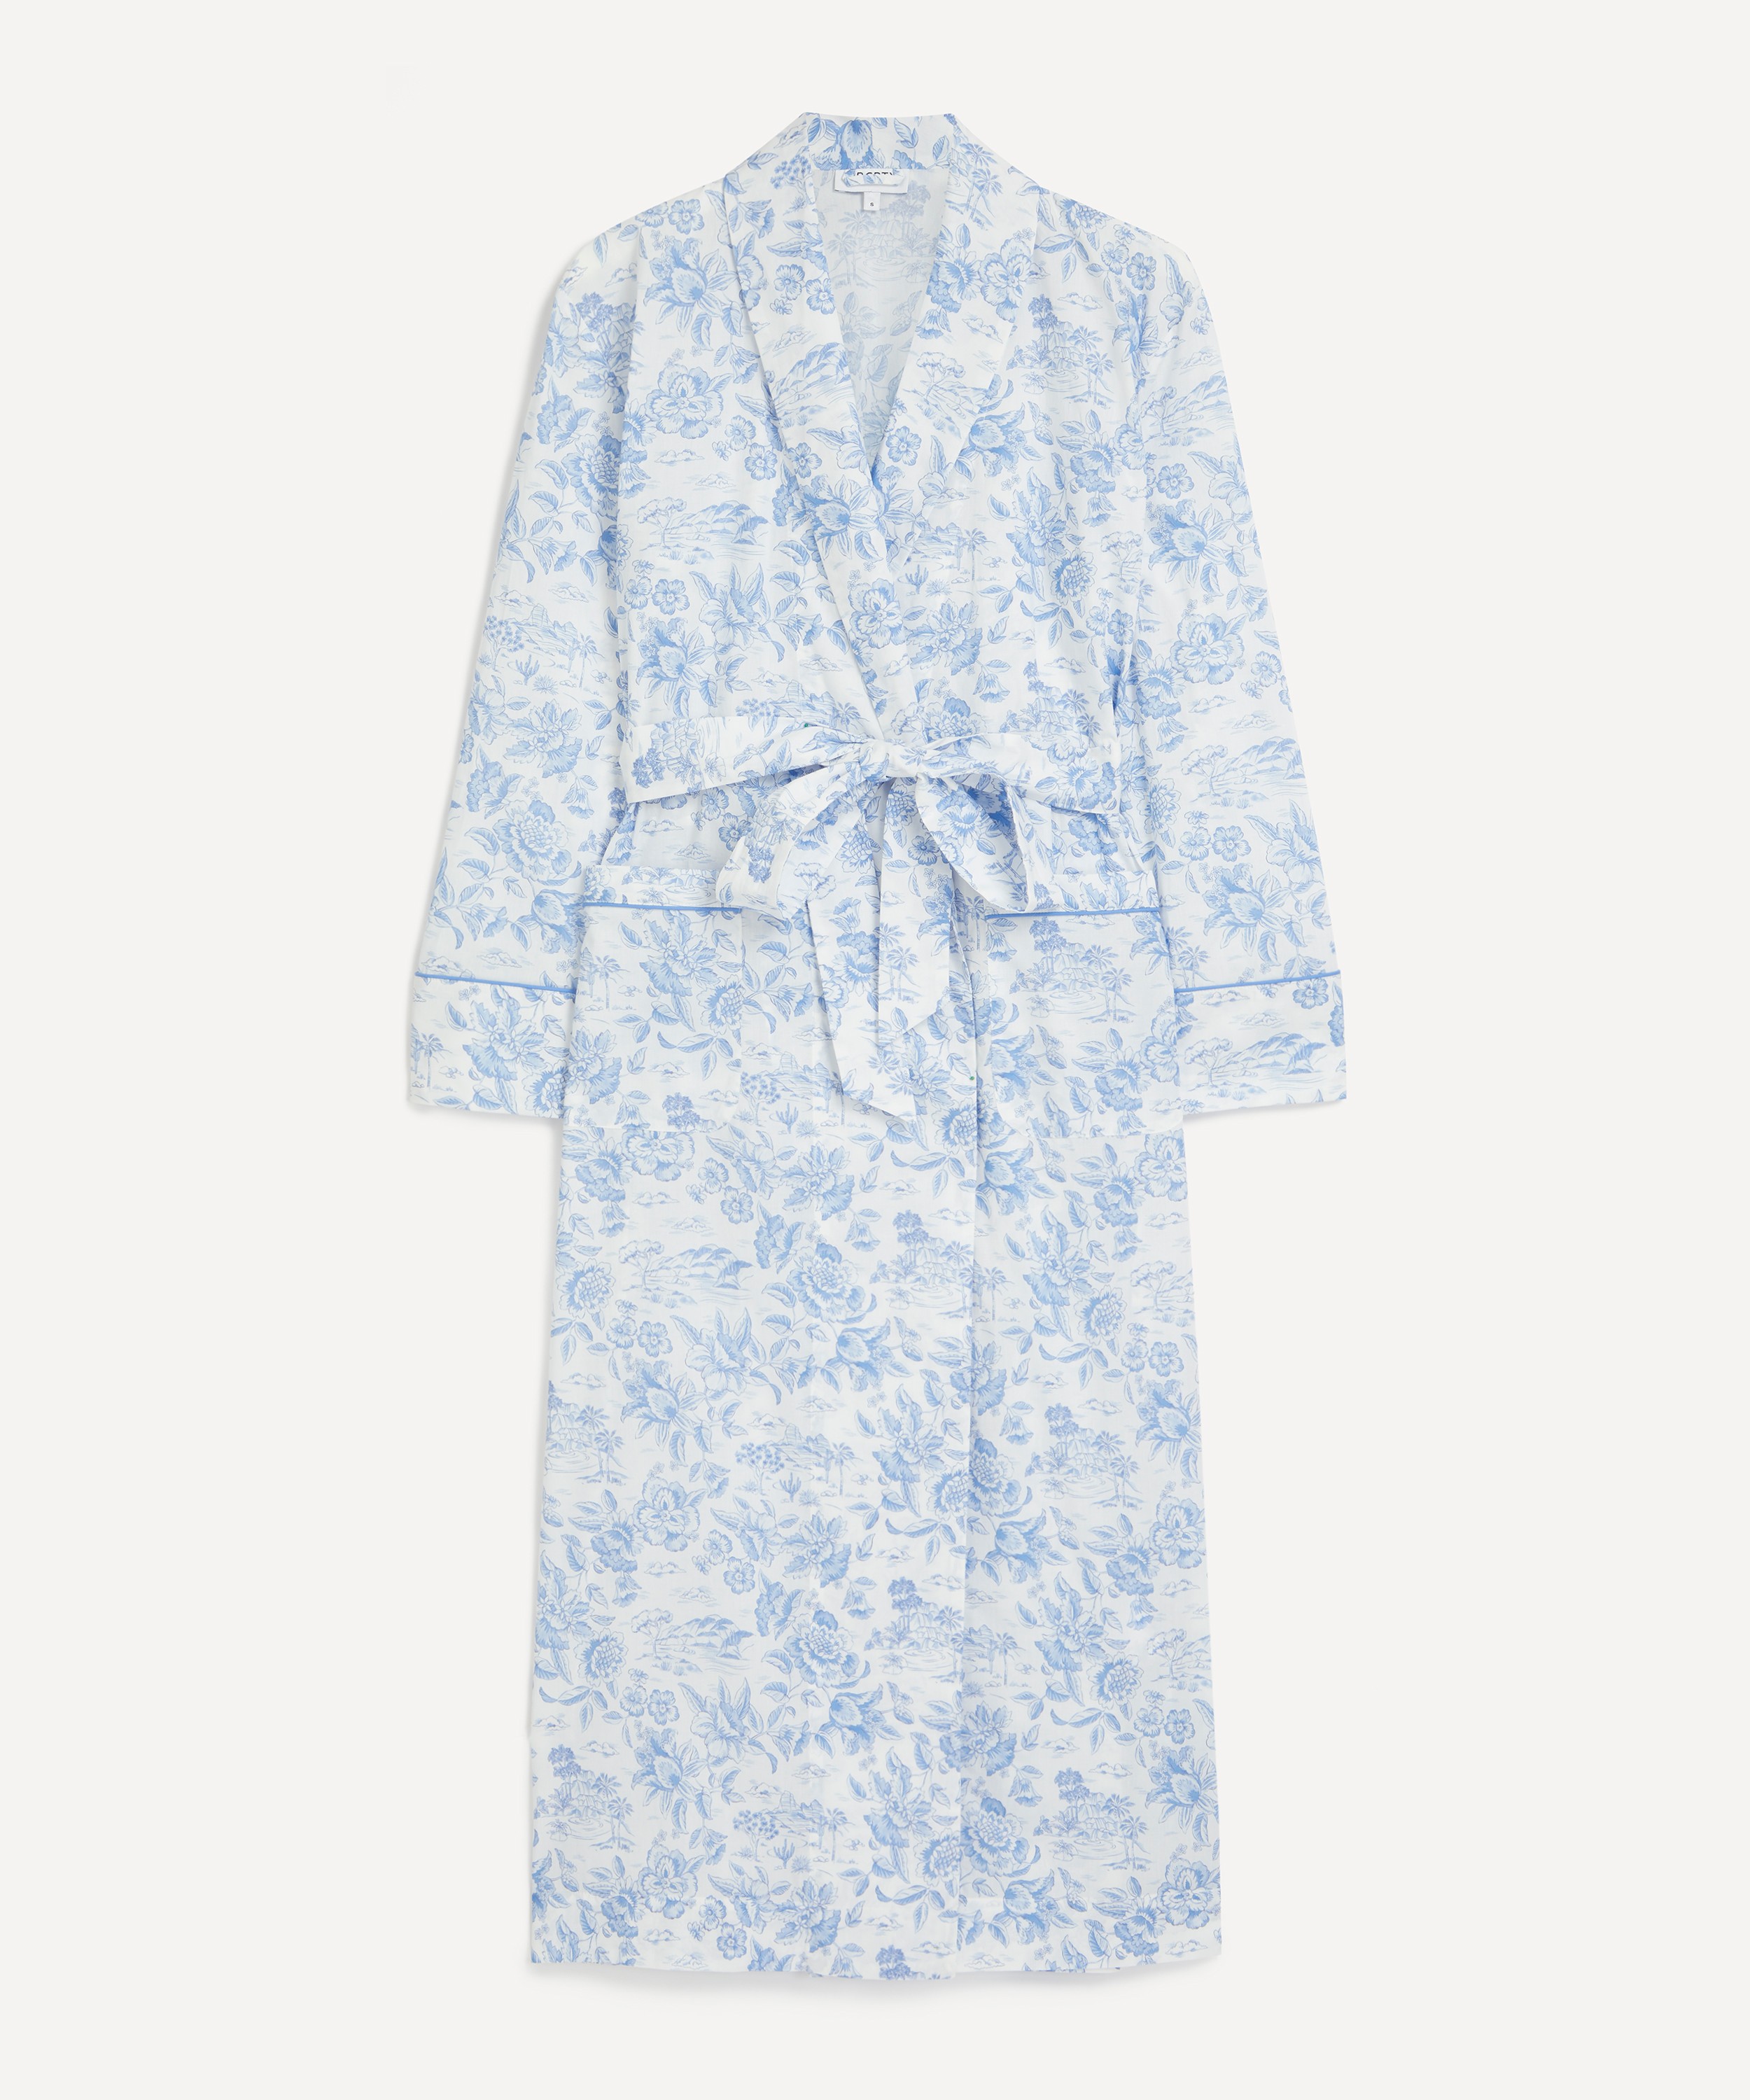 Liberty - Delft Lagoon Tana Lawn™ Cotton Classic Robe image number 0